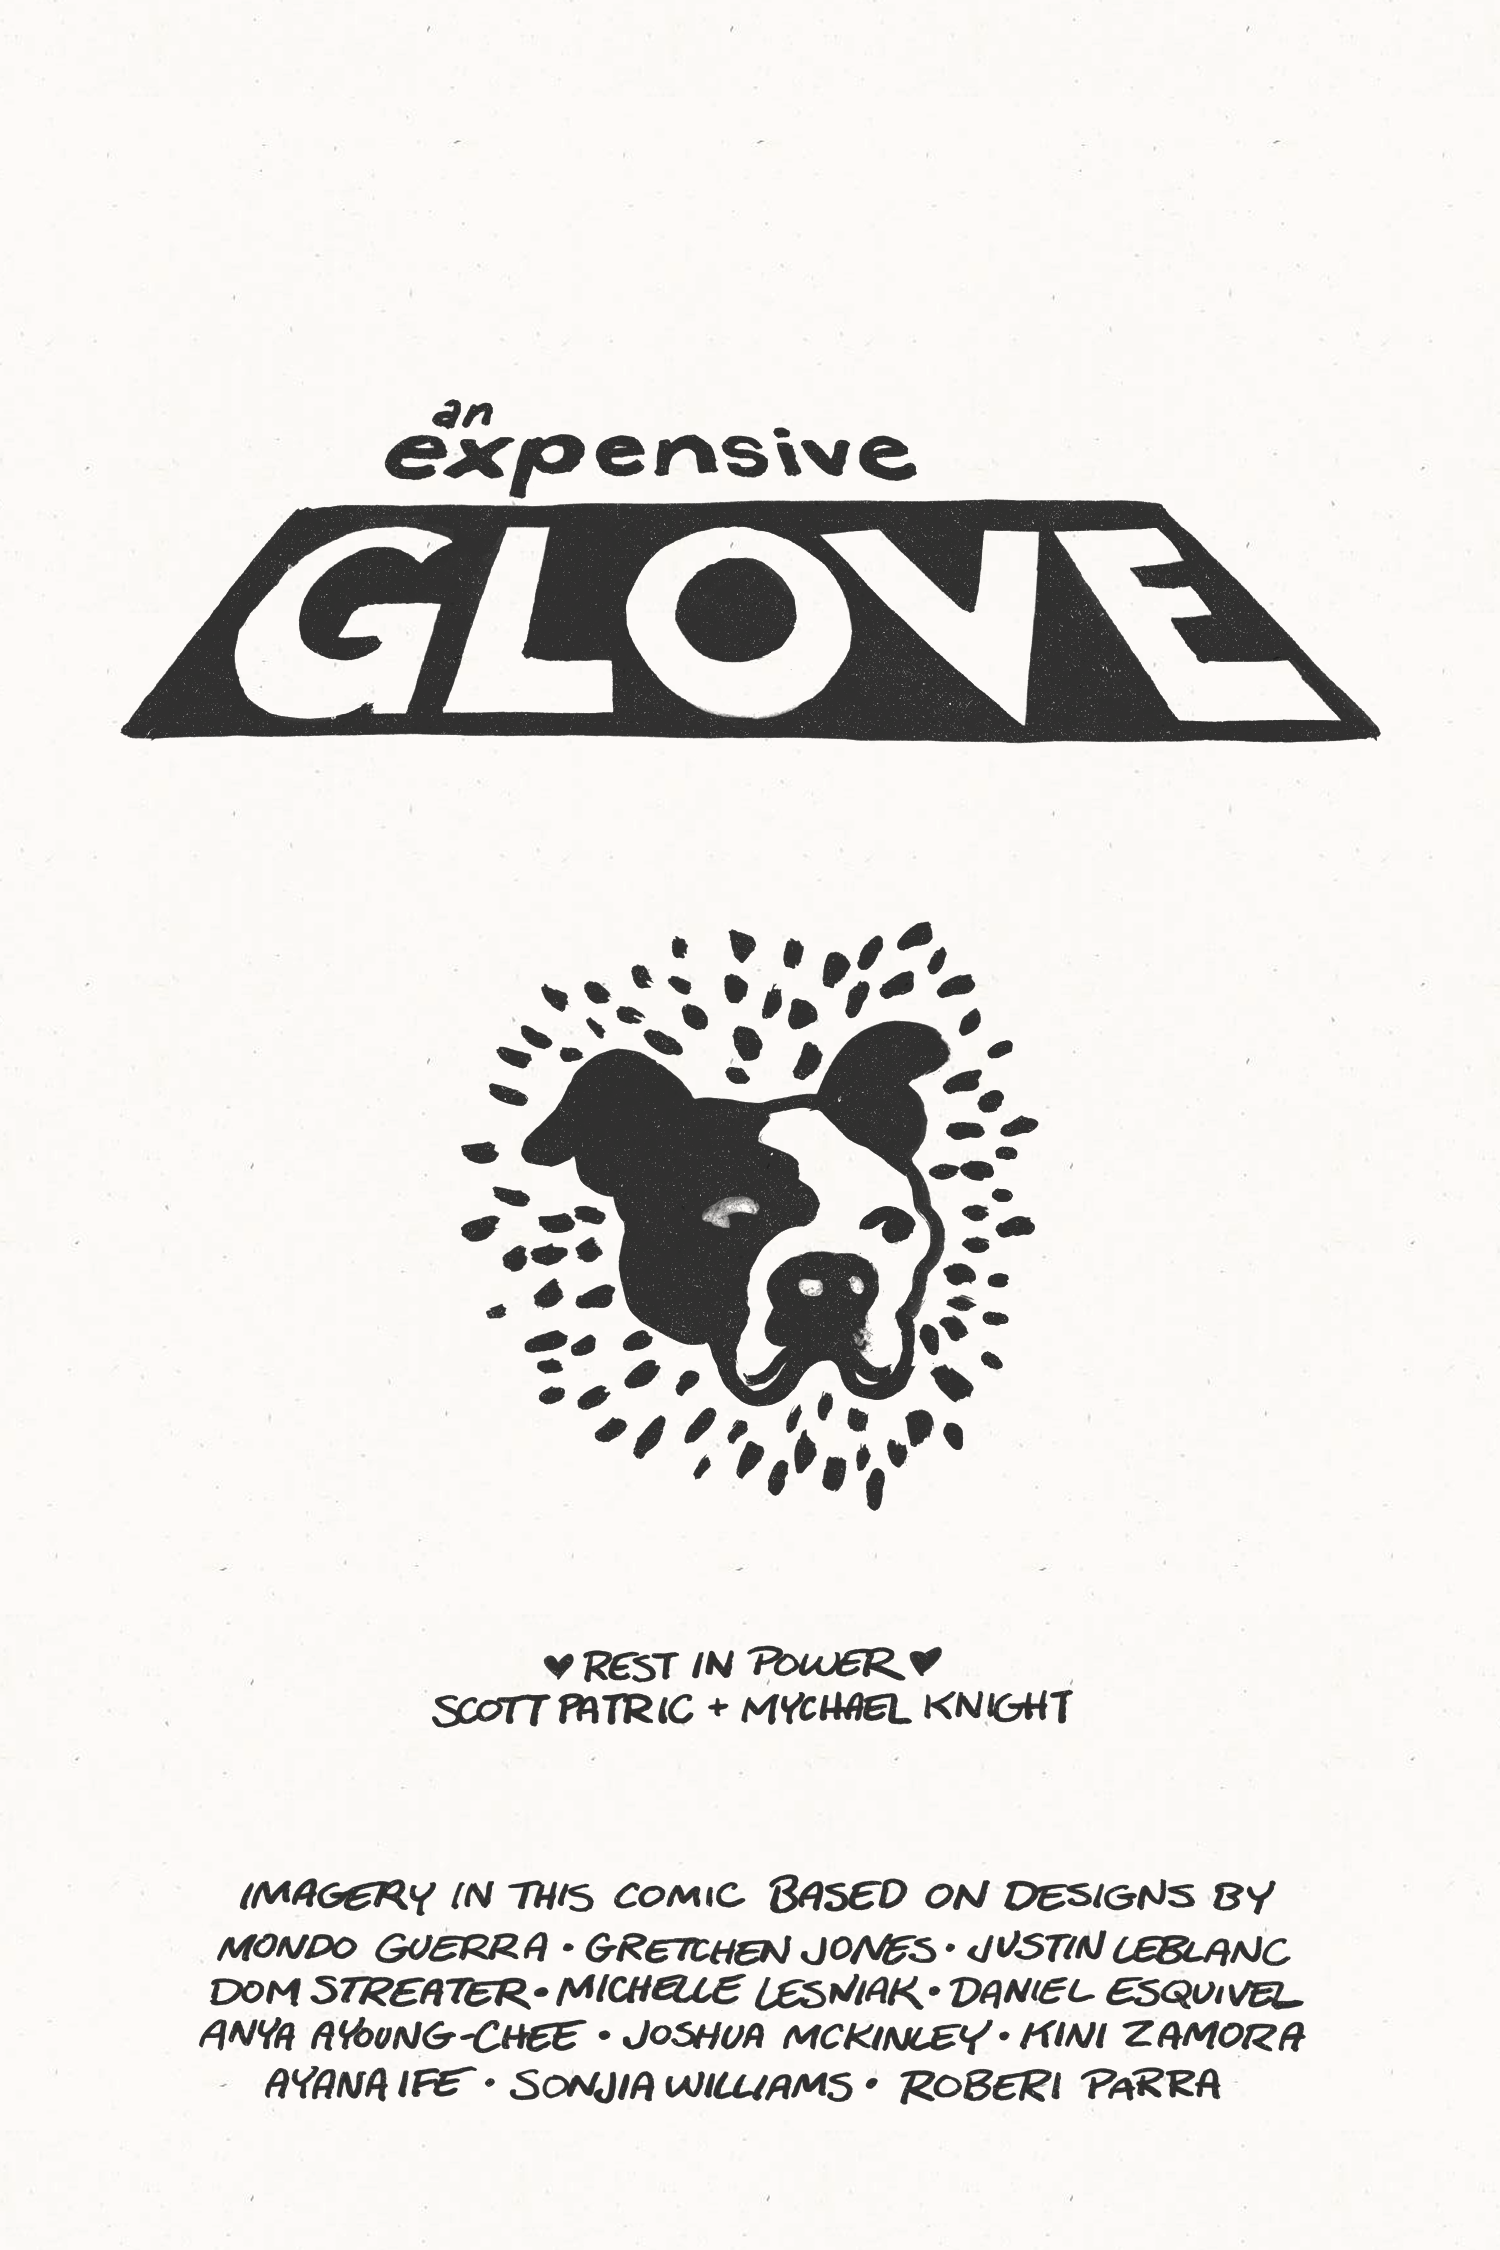 An Expensive Glove by K Czap